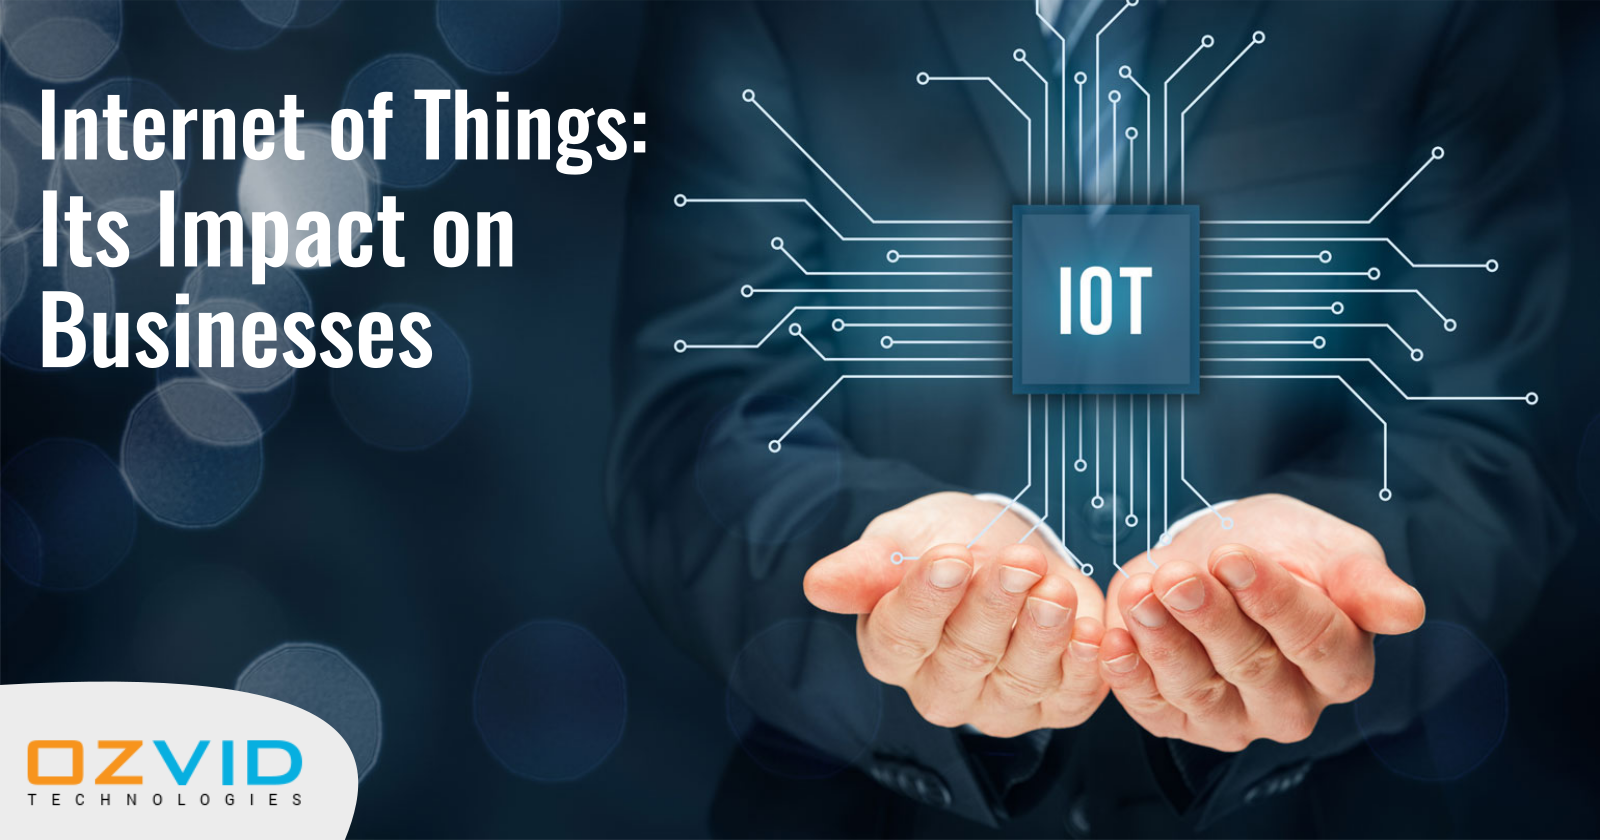 Internet of Things: Its Impact on Businesses